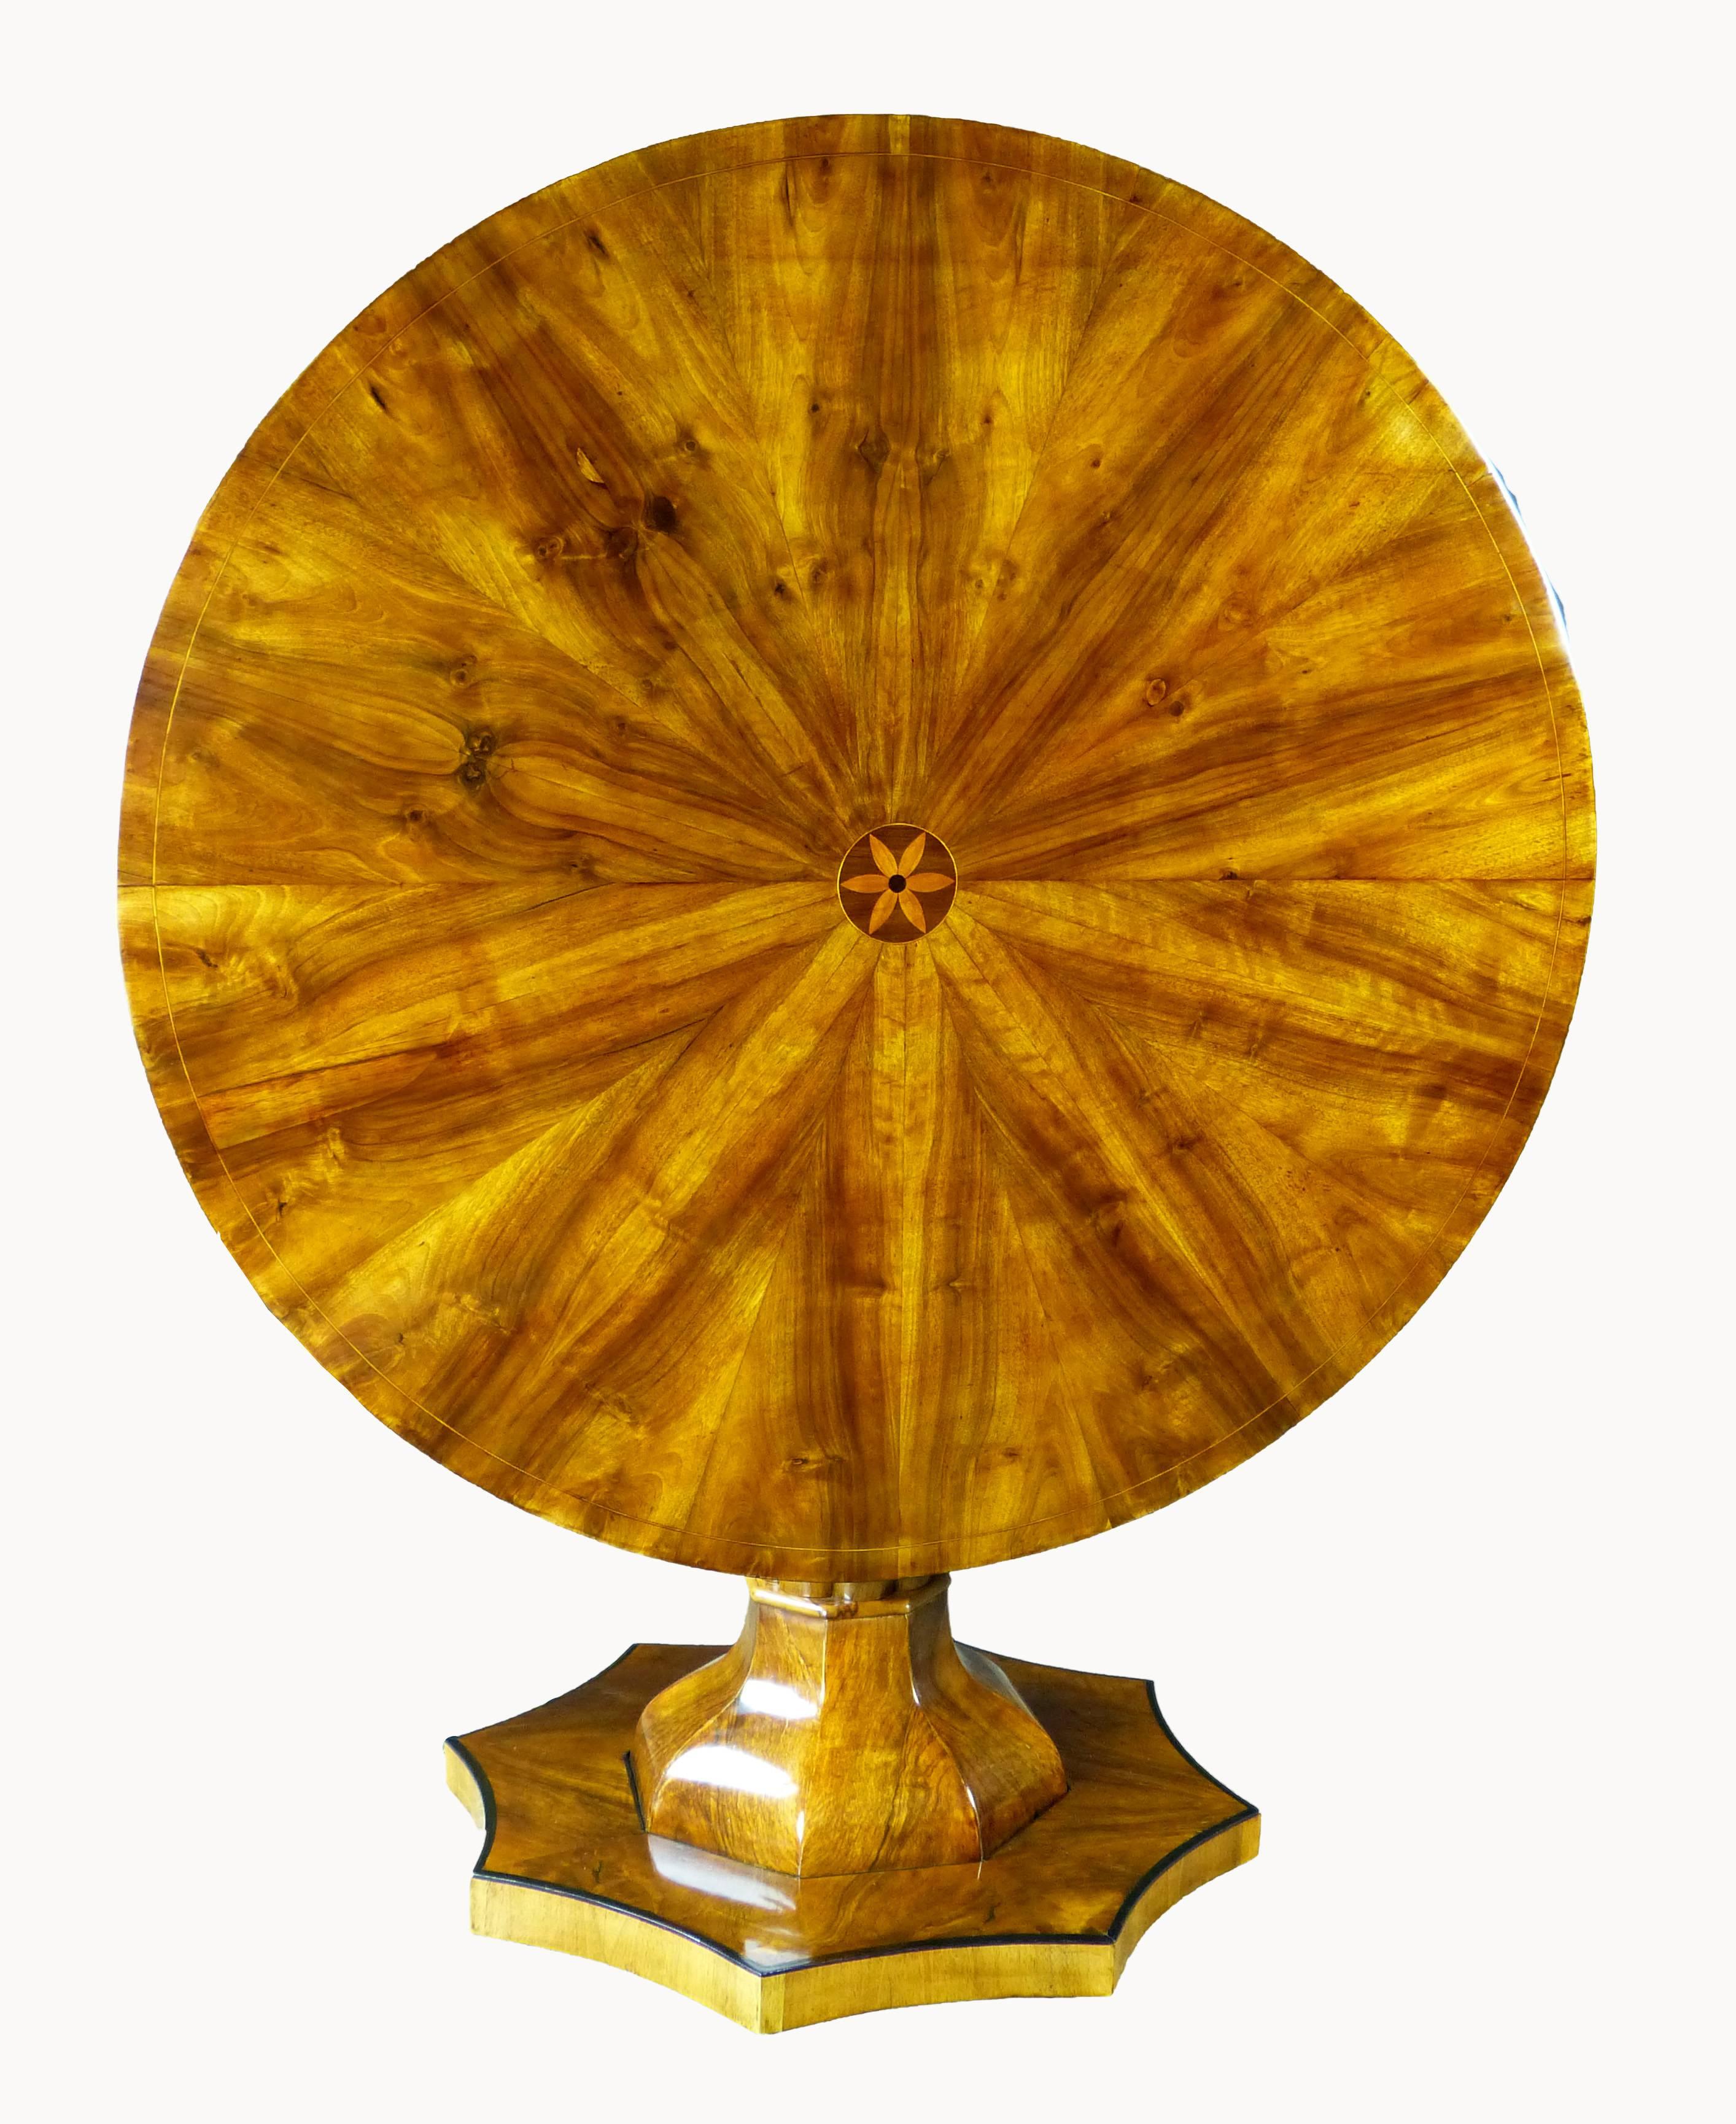 Fine and rare Biedermeier circular center table, the top inlaid with 10 times! repeating sunburst pattern of finely figured walnut with a flower center and line inlay. Its unique base of various complex forms of unequalled mastery with a cluster of